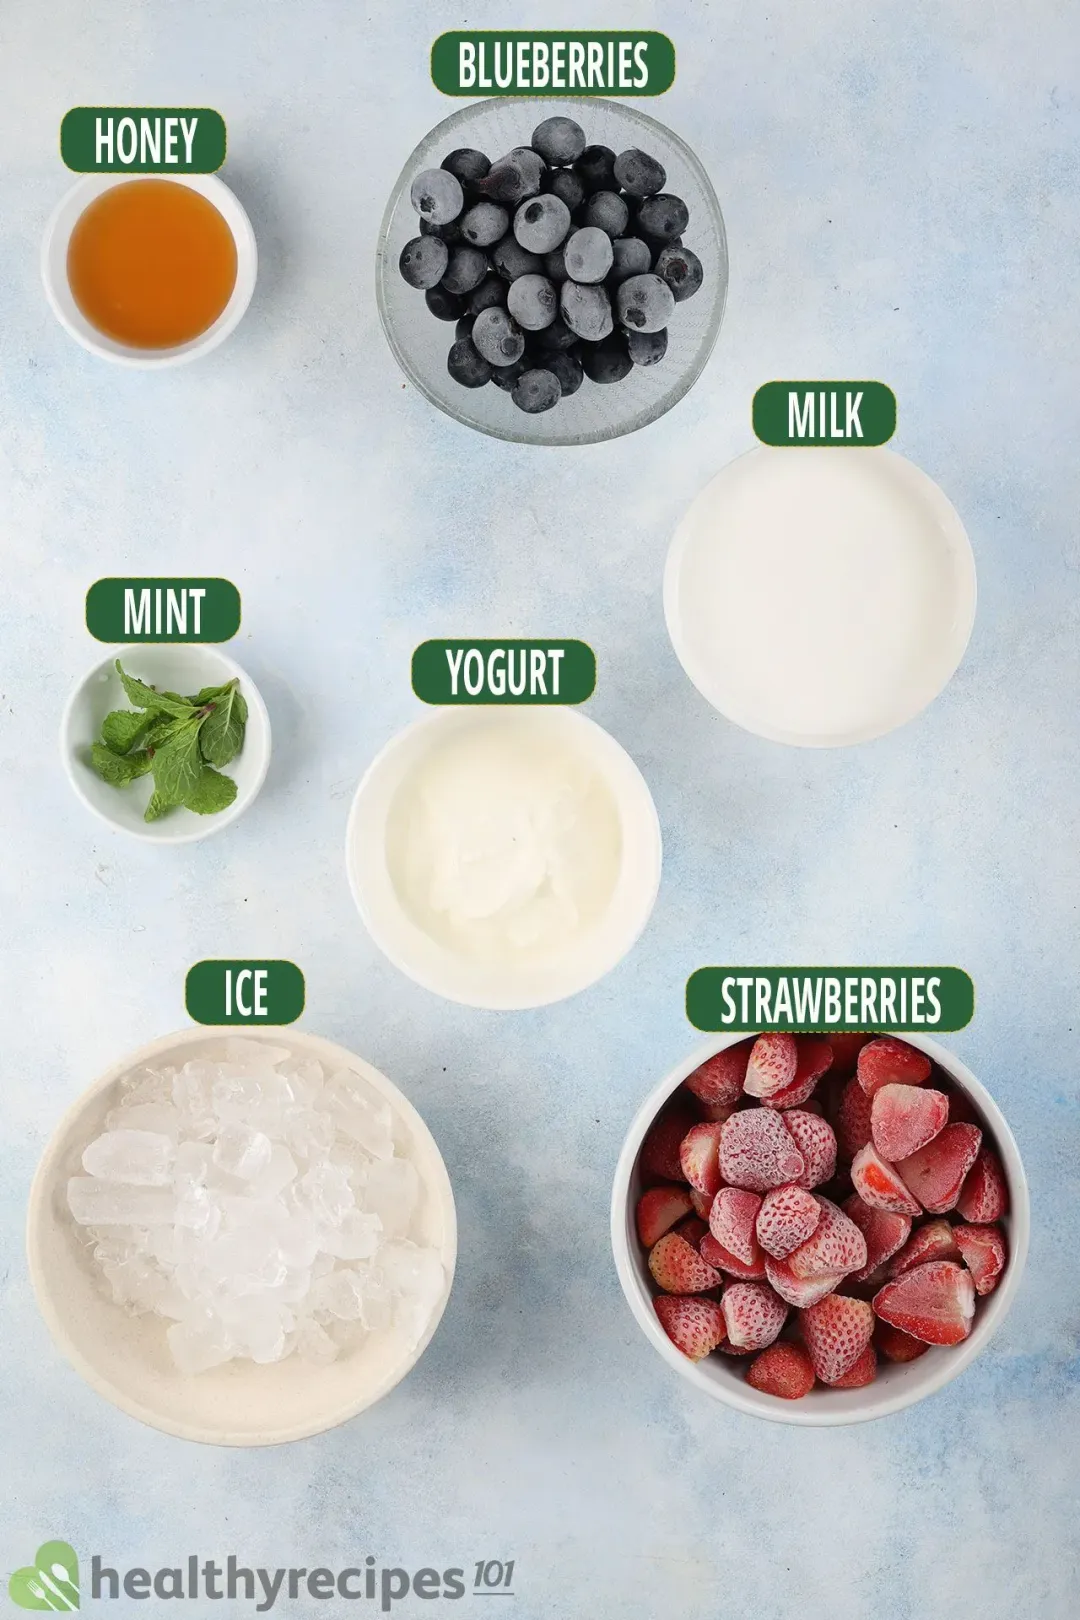 Ingredients for Strawberry Blueberry Smoothie